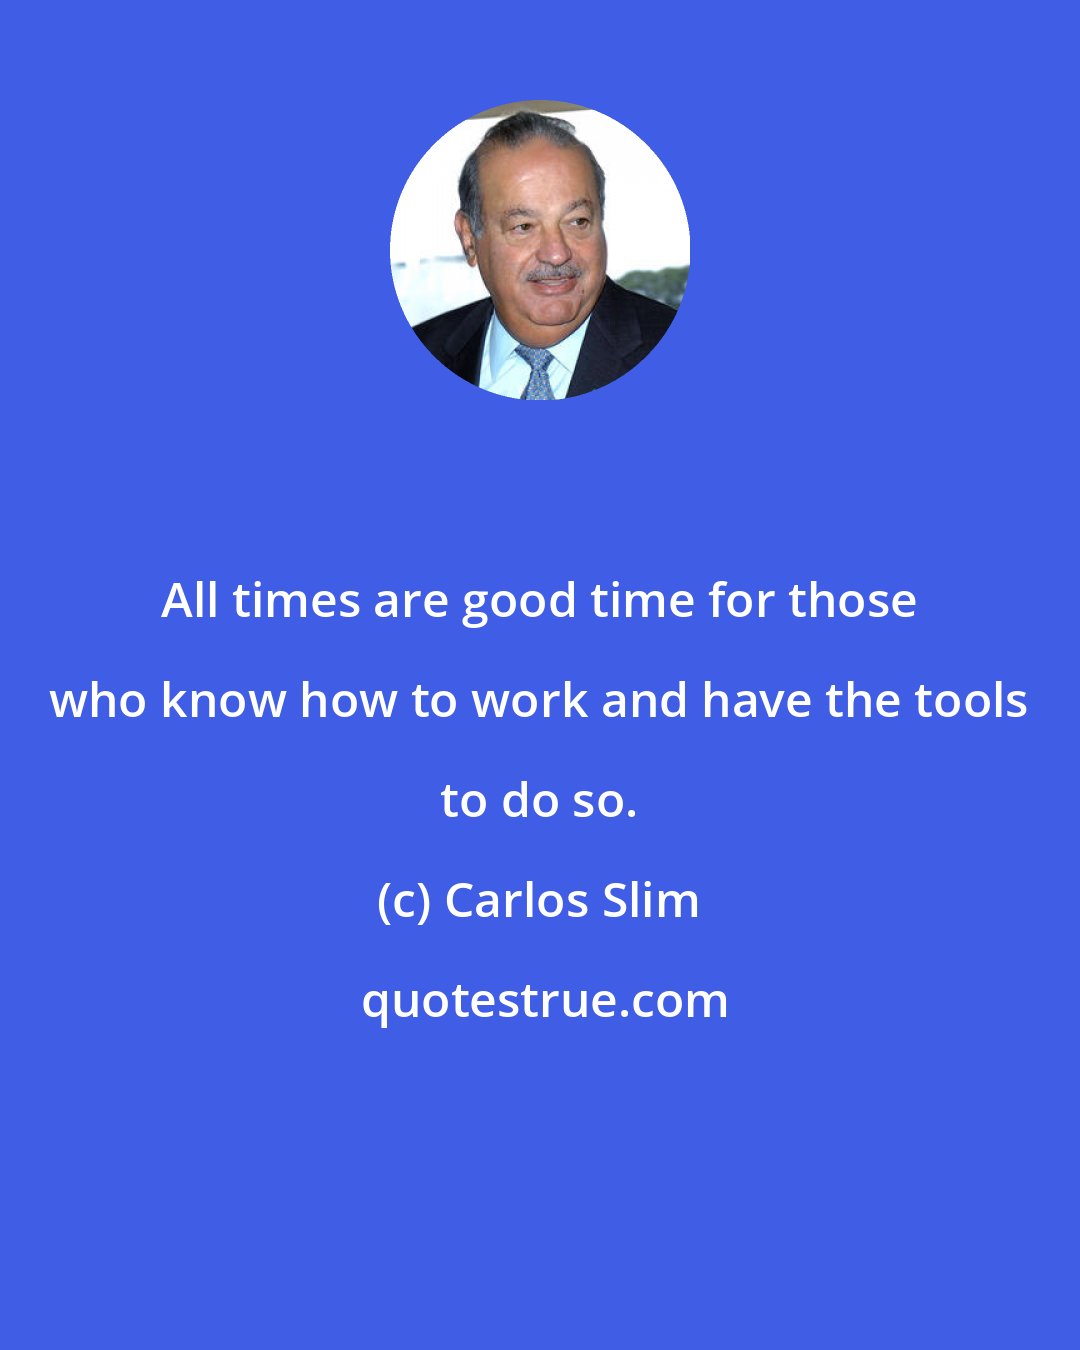 Carlos Slim: All times are good time for those who know how to work and have the tools to do so.